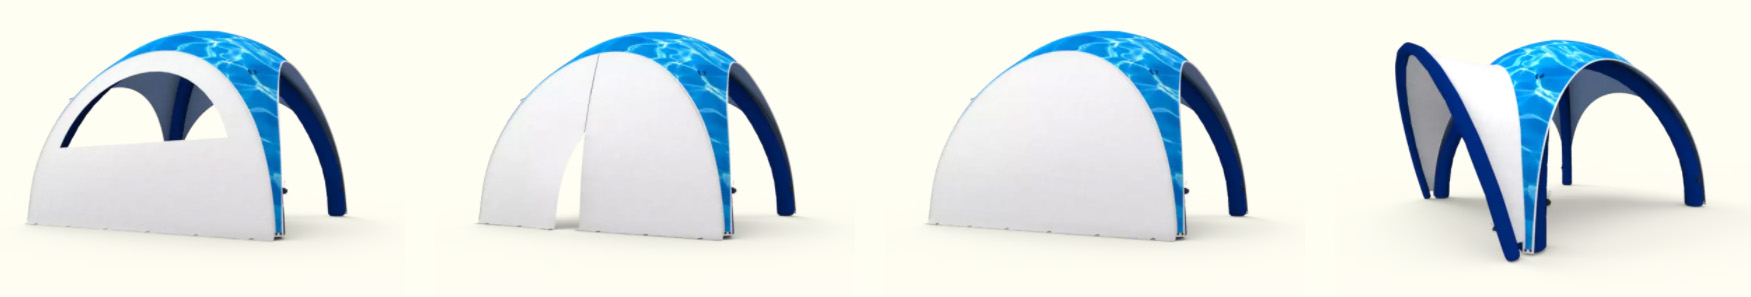 inflatable-tents-accessories-1